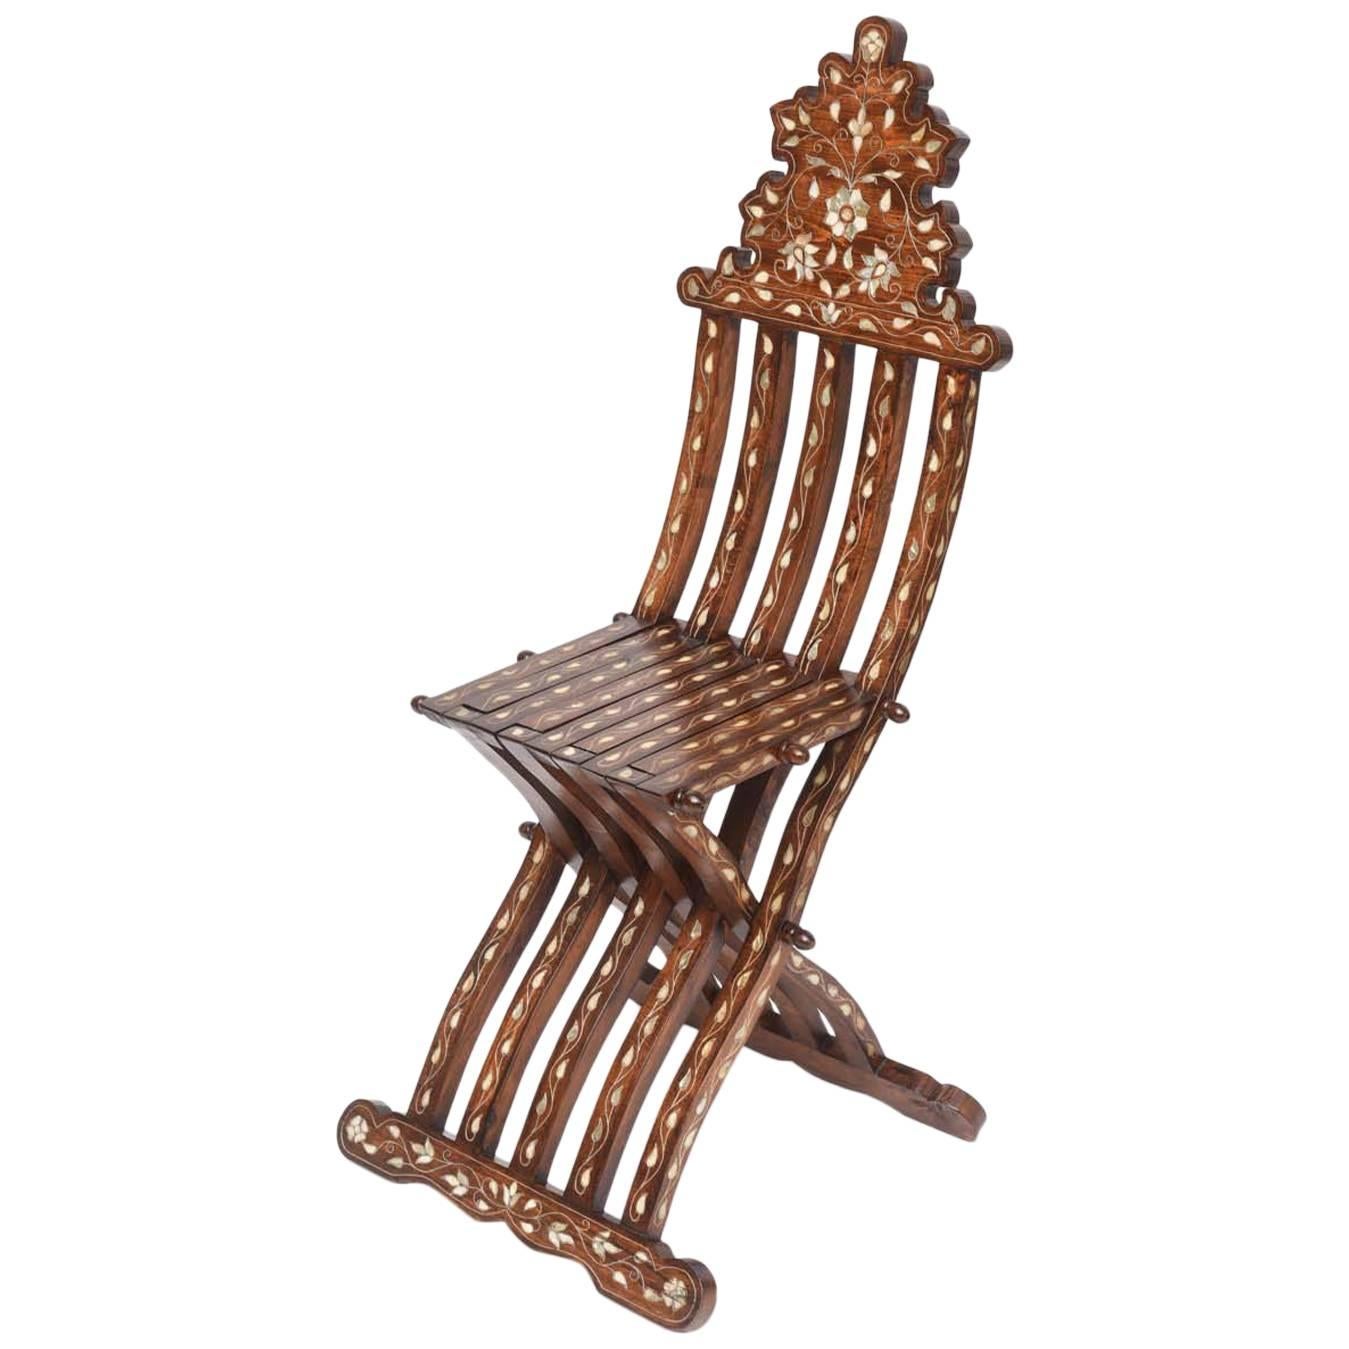 Syrian Mother-of-pearl Inlaid Folding Chair